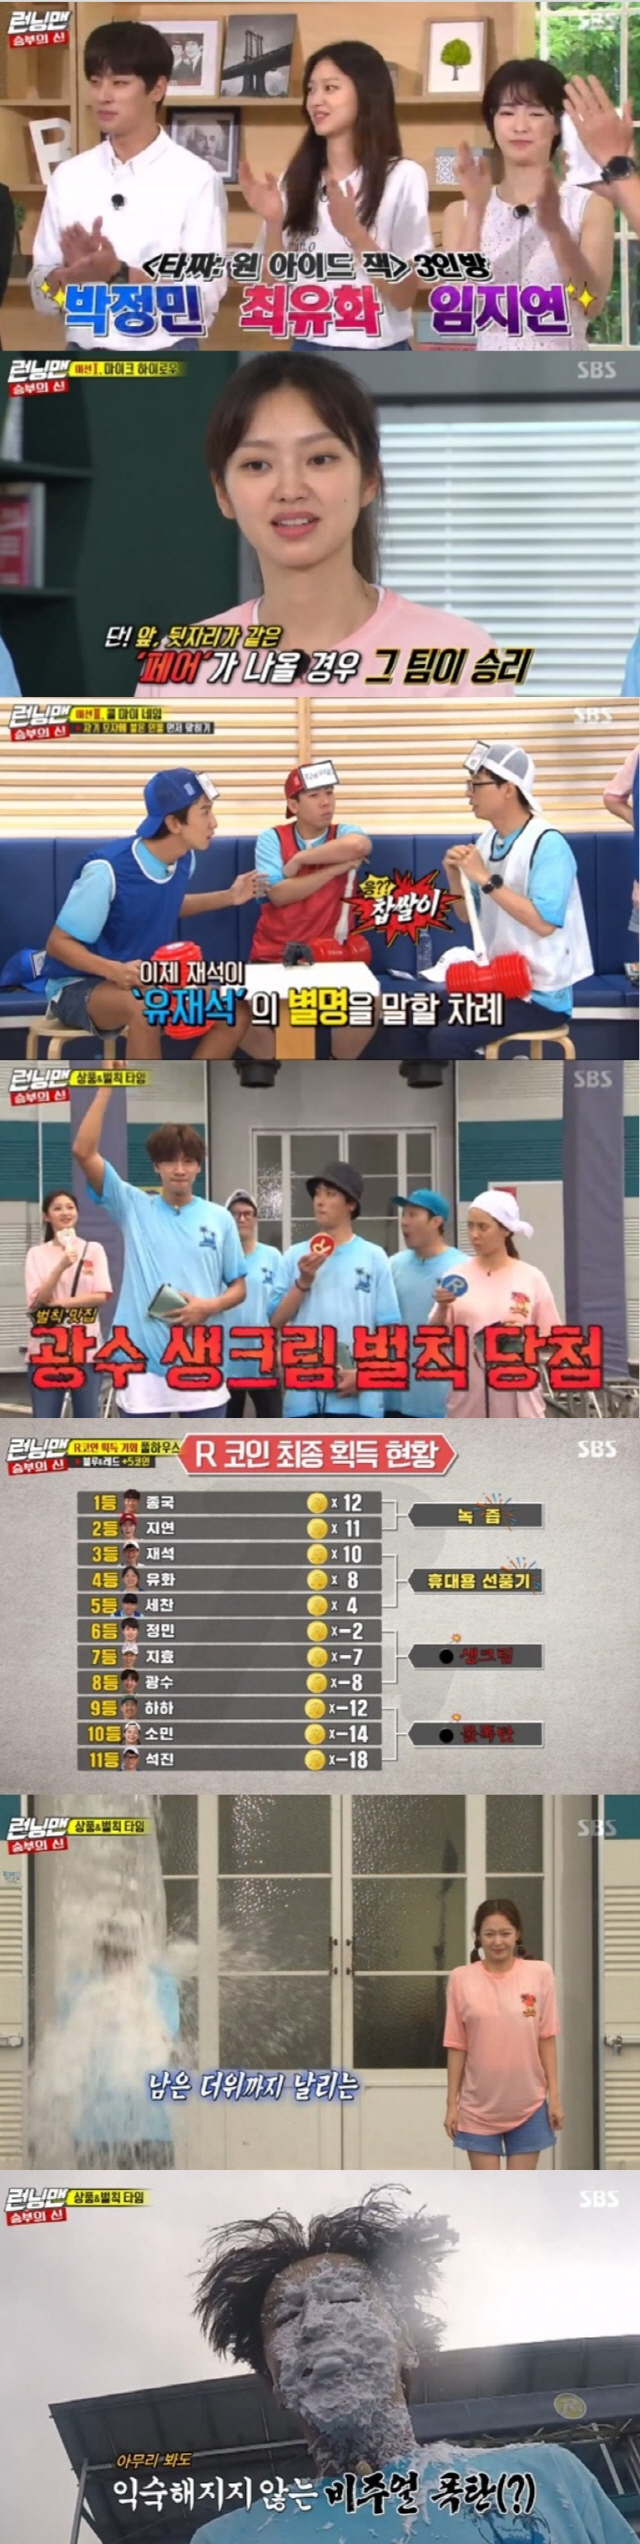 Running Man took the first place in the same time zone of 2049 target audience rating.According to Nielsen Korea, the ratings agency, SBS Running Man, which was broadcast on the 25th, recorded 3.6% of 2049 target audience rating (based on the second part of the metropolitan areas audience rating), which is an important indicator of major advertising officials, surpassing all of the Masked Wang and Dog ear, and the highest audience rating per minute soared to 7.6%.The show was decorated with God of Victory Race and starred actors Park Jung-min, Lim Ji-yeon and Choi Yoo-hwa of the movie Tazza: The High Rollers 3: One Eyed Jack, and comedian Ji Suk-jin and actor Jeon So-min appeared under the opening penalty.Ji Suk-jin transformed into the movie With God and Jeon So-min transformed into Jigsaw of the movie Saw and laughed.On this day, Race became a more intense race with a solo exhibition, and the last mission covered the results through a full house game.The scene had a top audience rating of 7.6 percent per minute, accounting for the best one minute.With a large number of penalties, Lee Kwang-soo received a fresh cream bomb, Haha and Jeon So-min received a water bomb penalty.Meanwhile, Running Man will hold a long-awaited 9th anniversary fan meeting Running District at Ewha Womans University Auditorium at 7 pm today (26th).